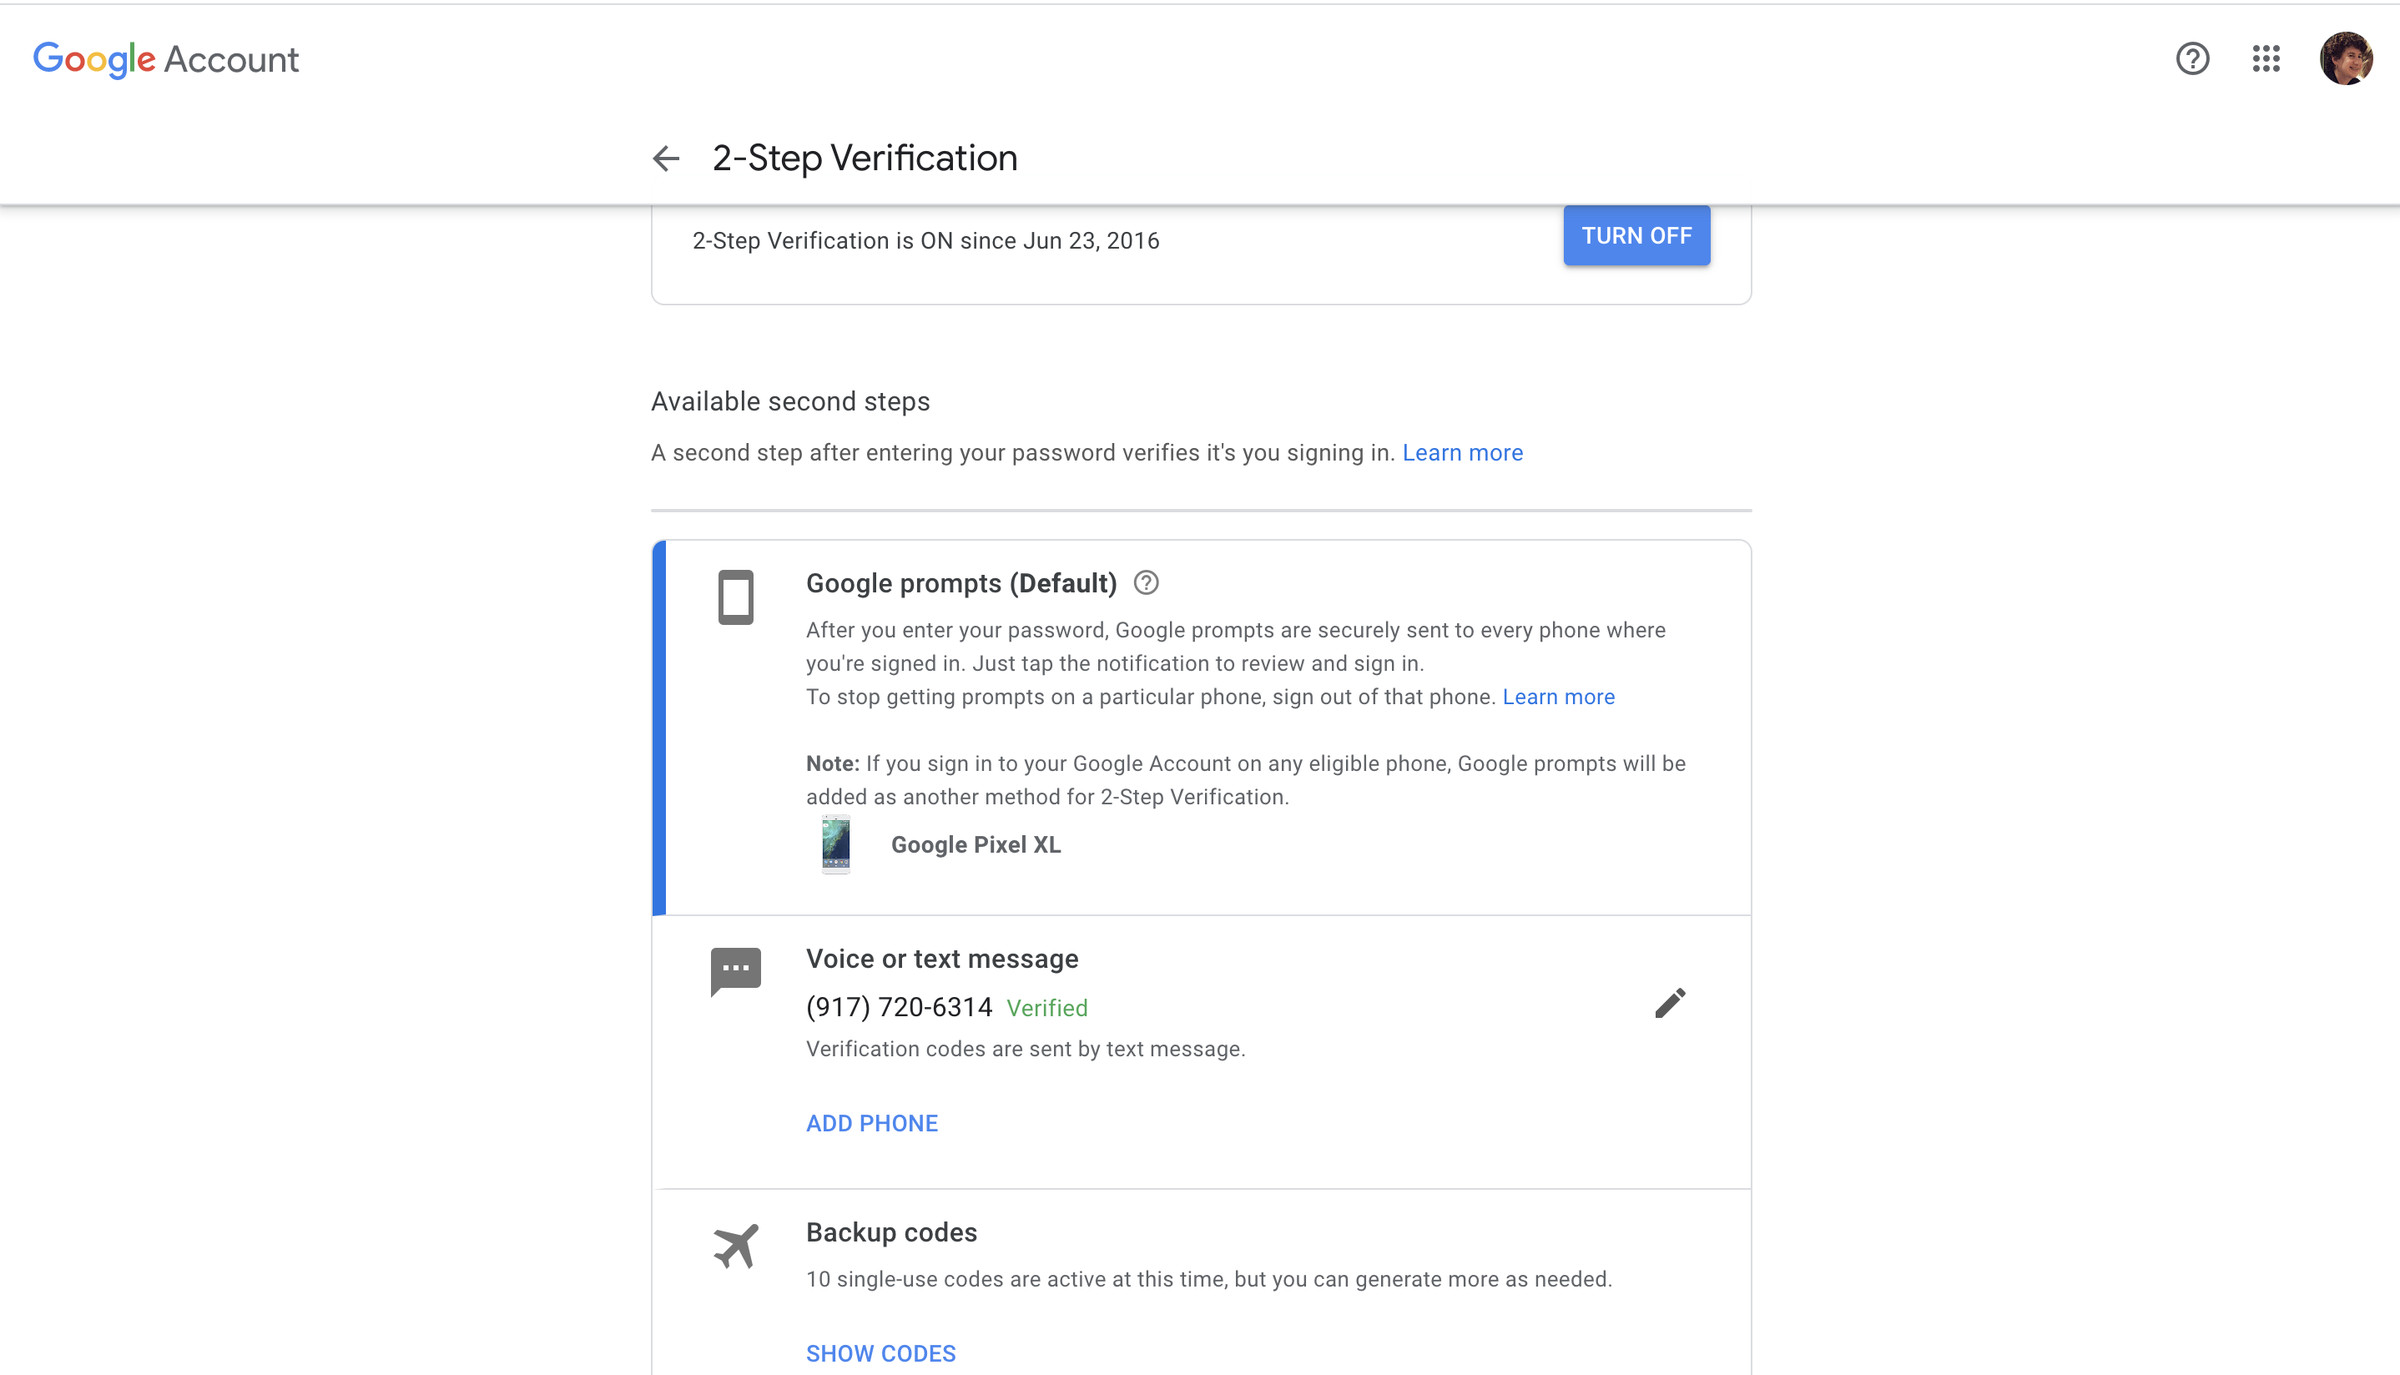 Click on “Show Codes” to get your ten backup codes for your Google account. 